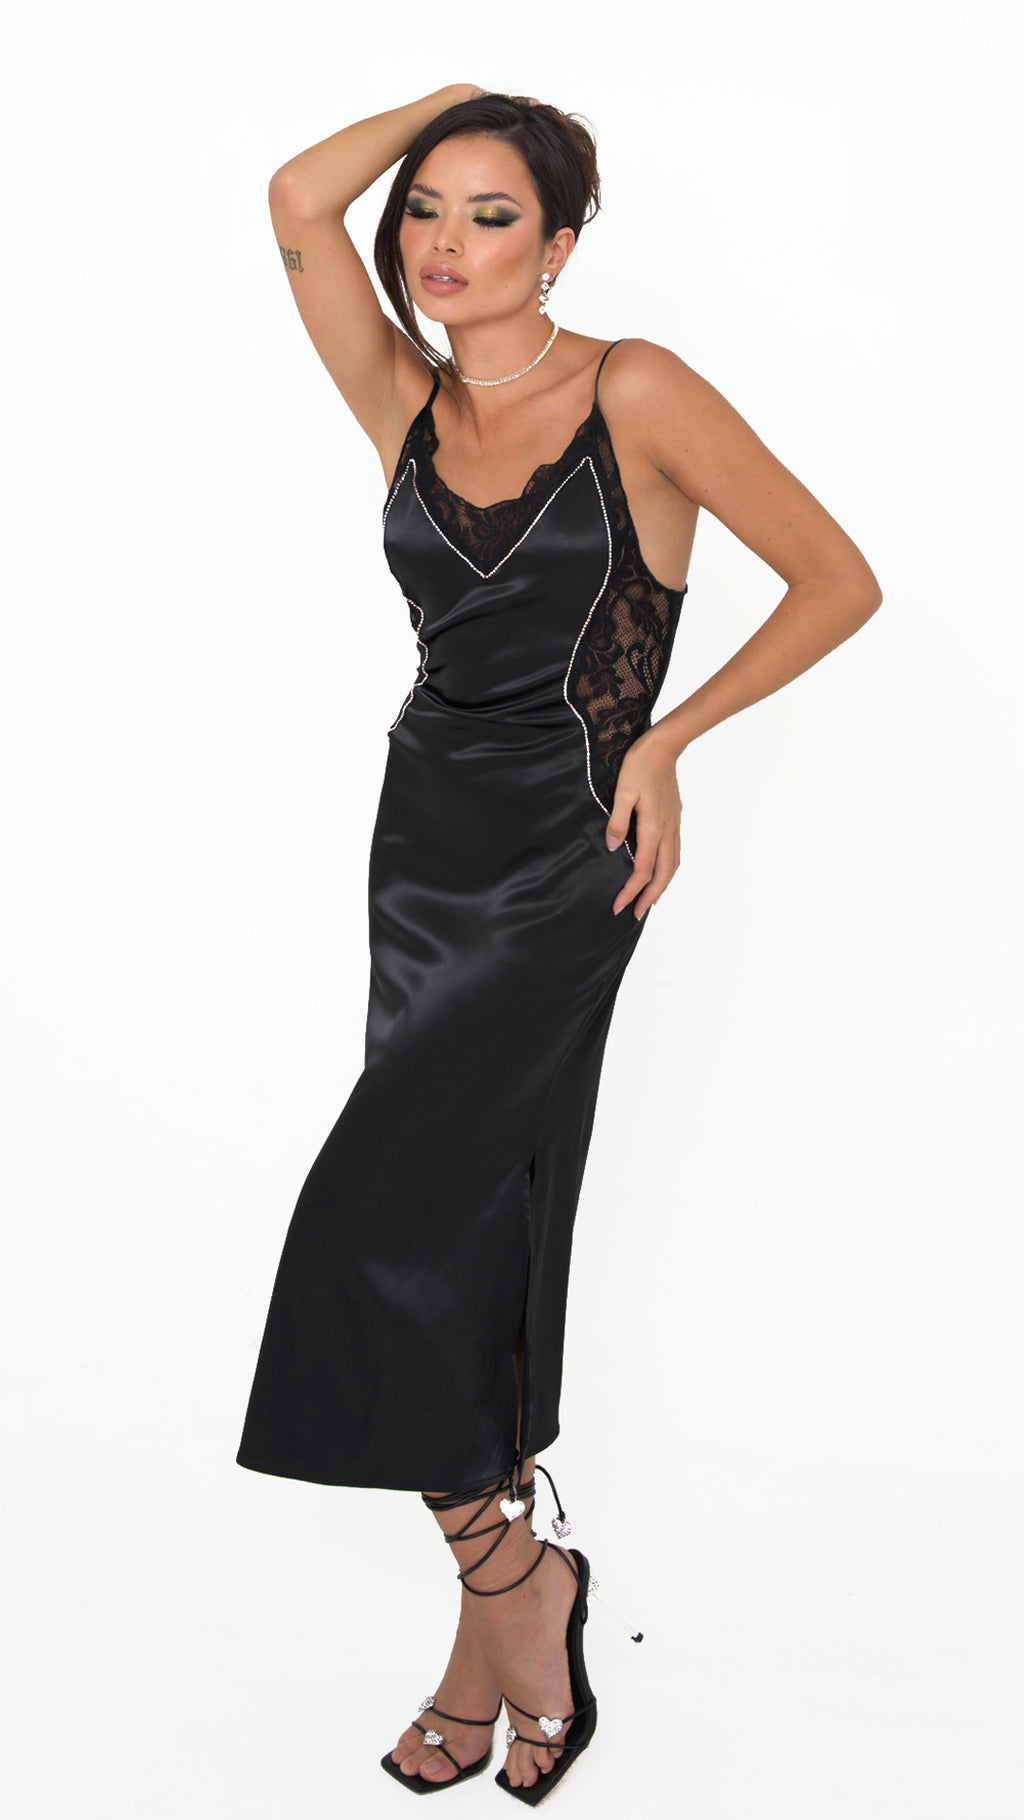 Scarfina Black Satin, Lace and Crystal Dress